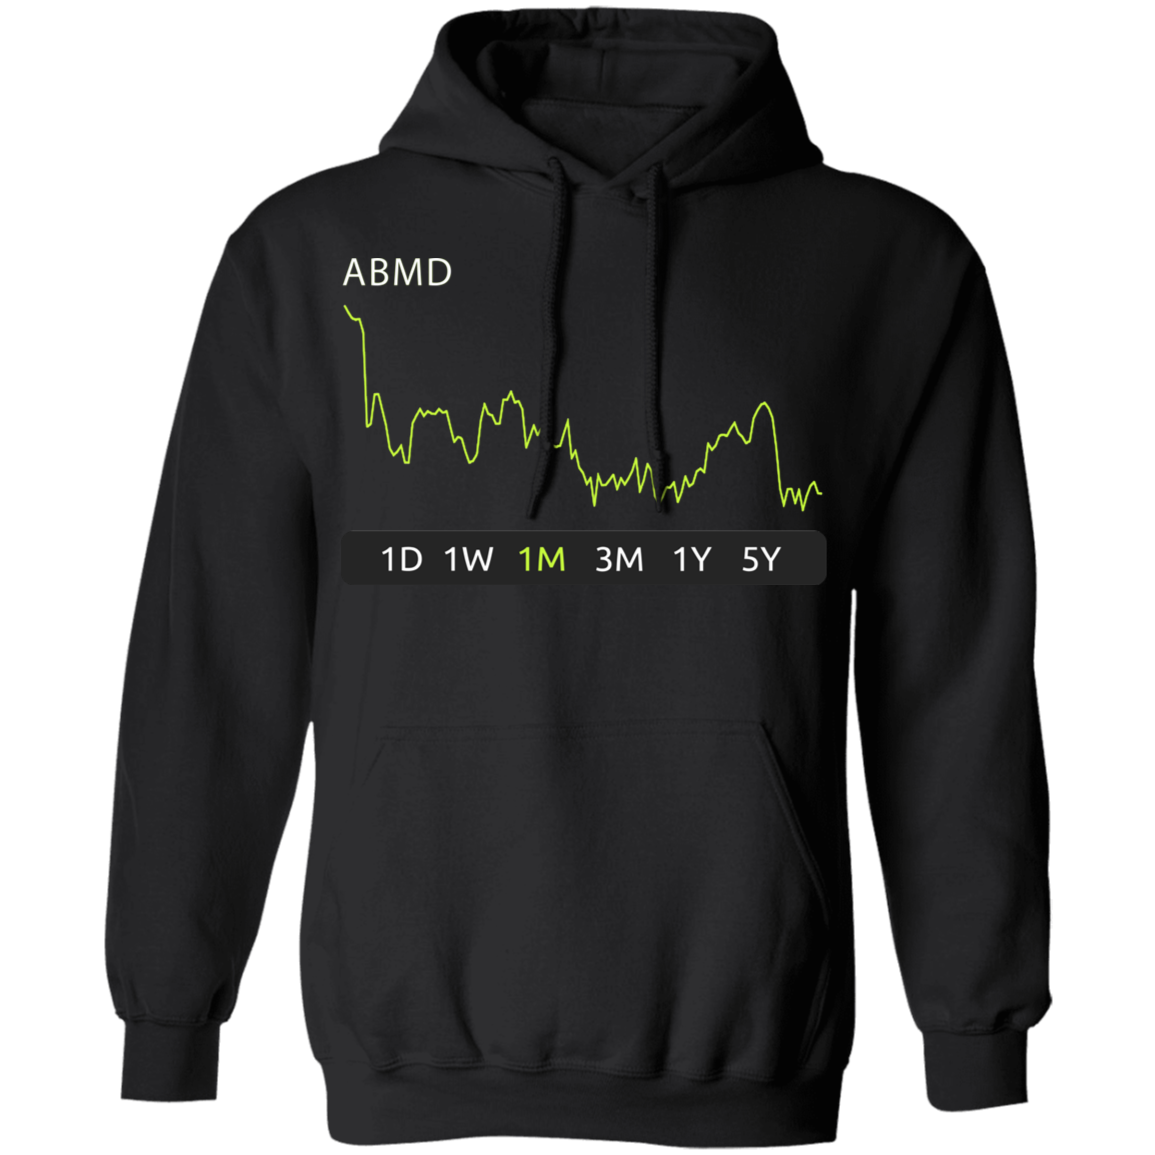 ABMD Stock 1m Pullover Hoodie